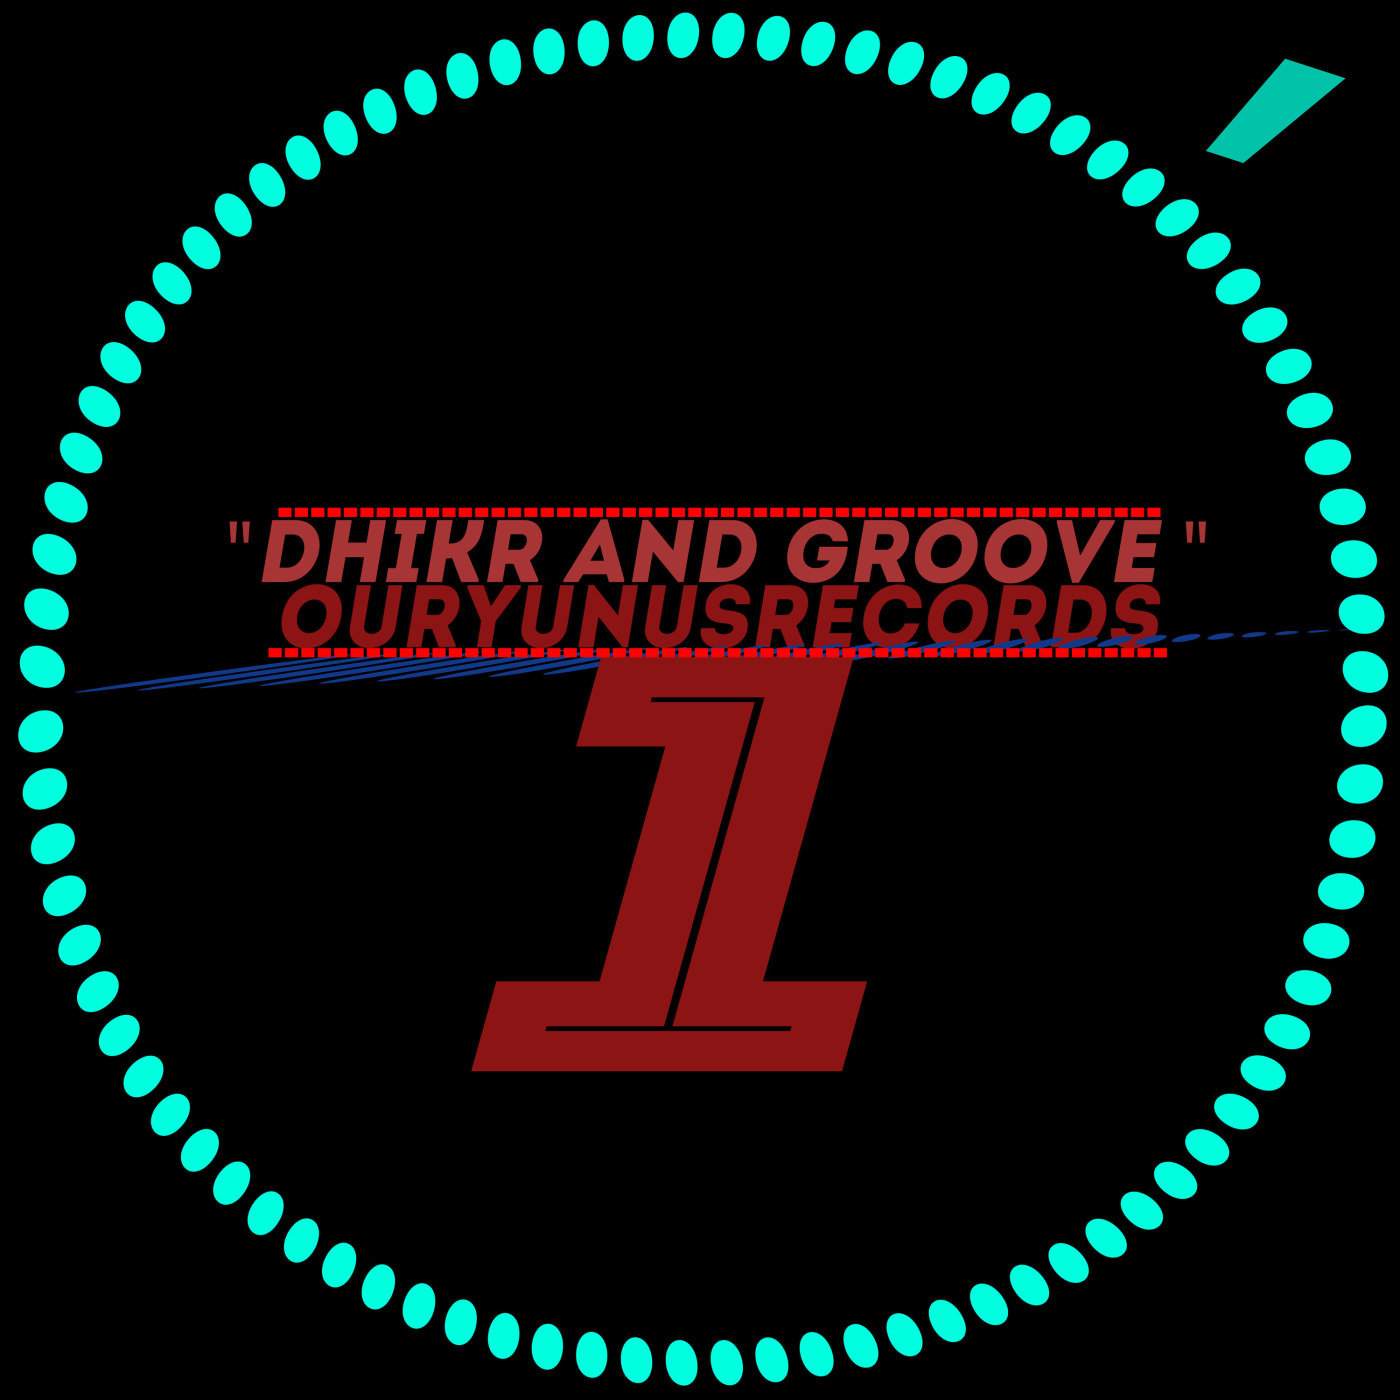 Jonasclean - Dhikr and Groove 1 / Our Yunus Records